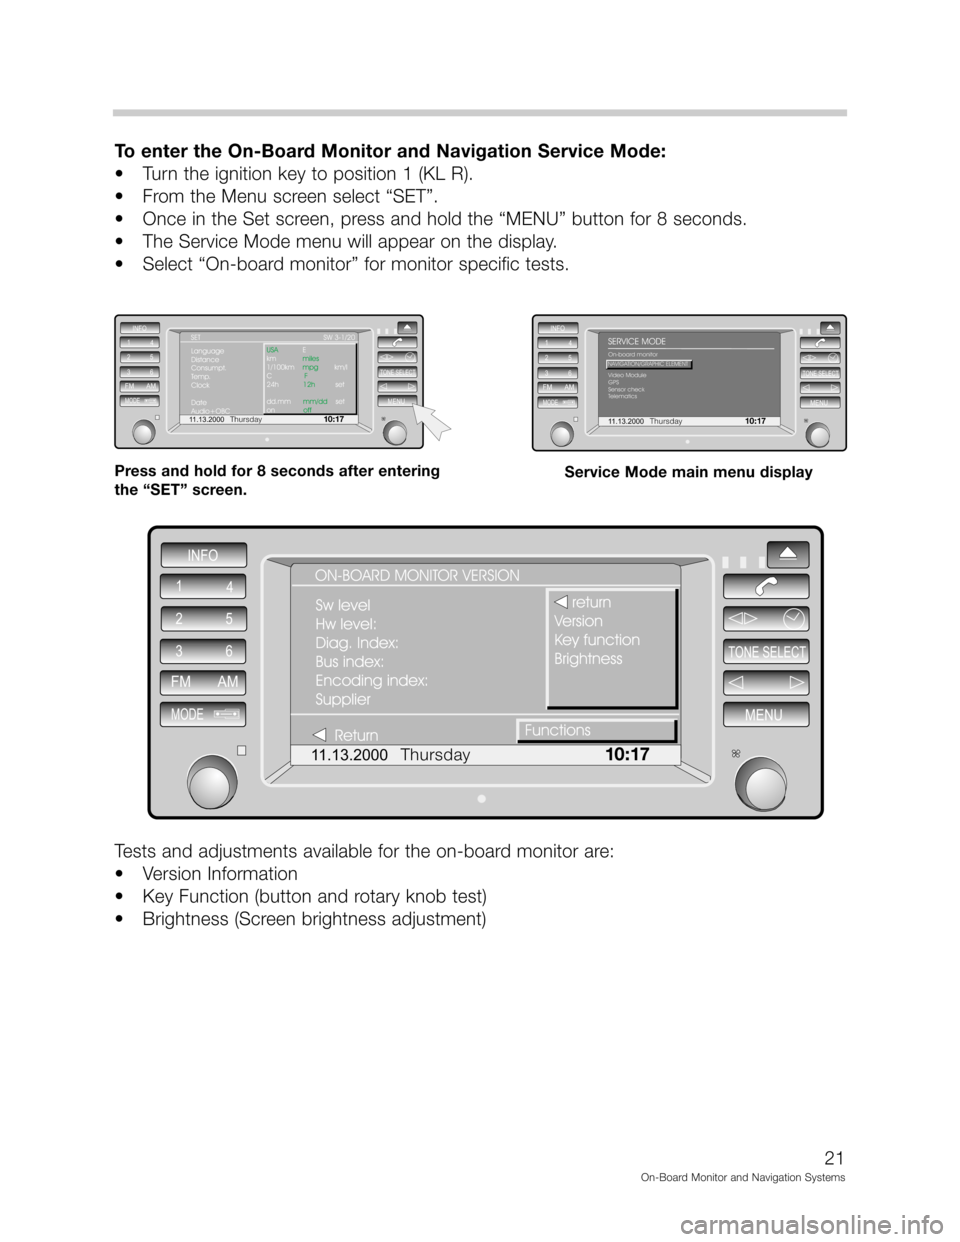 BMW 3 SERIES 2002 E46 On Board Monitor System Workshop Manual *



"&
(	
!&!"	! "!", 1" !, 	
 #


9

*7$3 8
 <	

?(#@
 

(